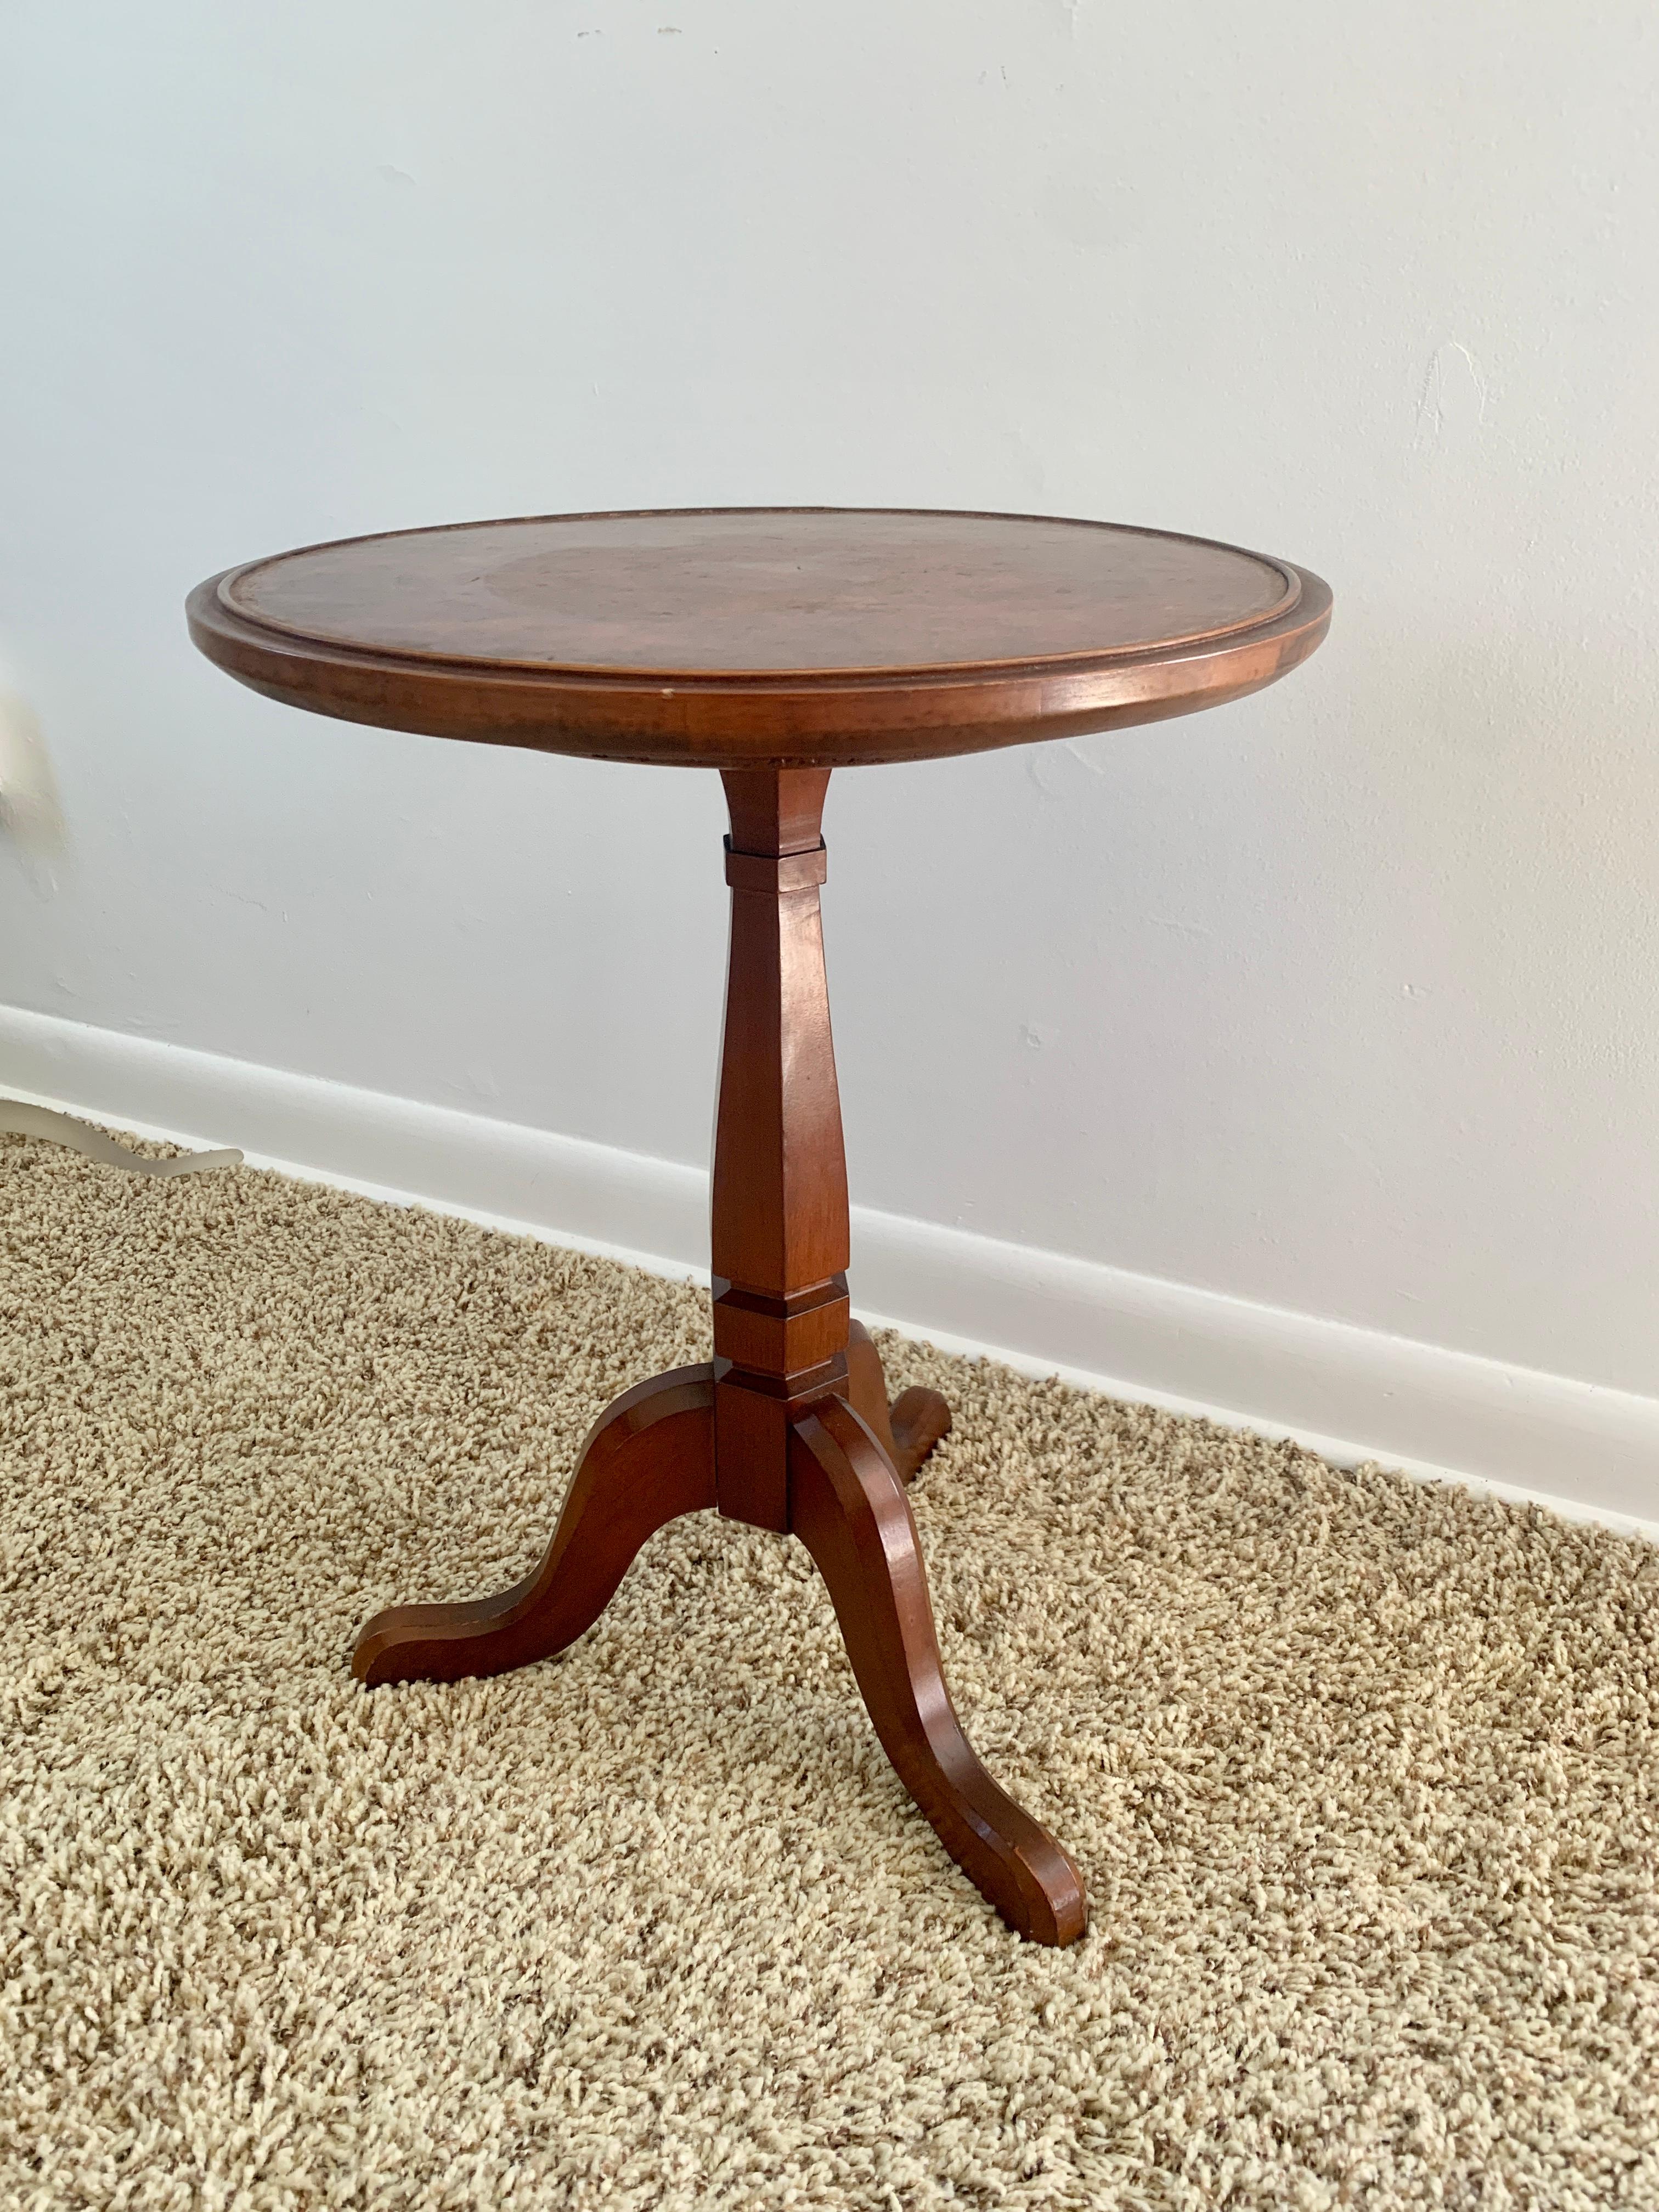 20th Century Vintage Georgian Embossed Leather Top Cherry Wood Round Side Table For Sale